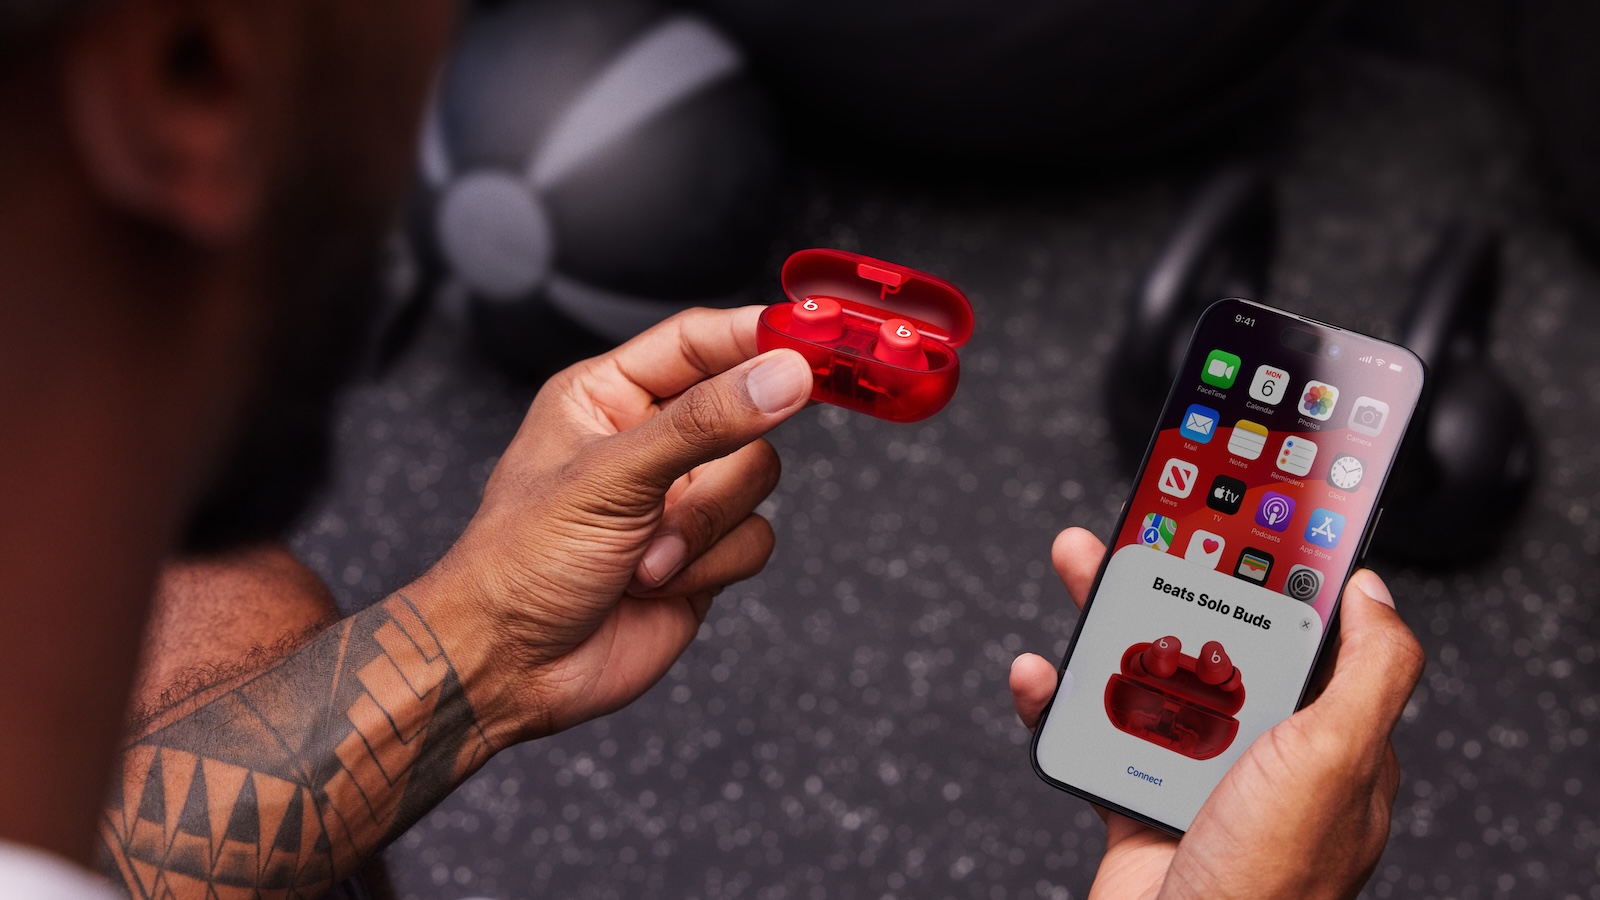 Beats Solo Buds Unboxed, Available to Order Starting Next Week